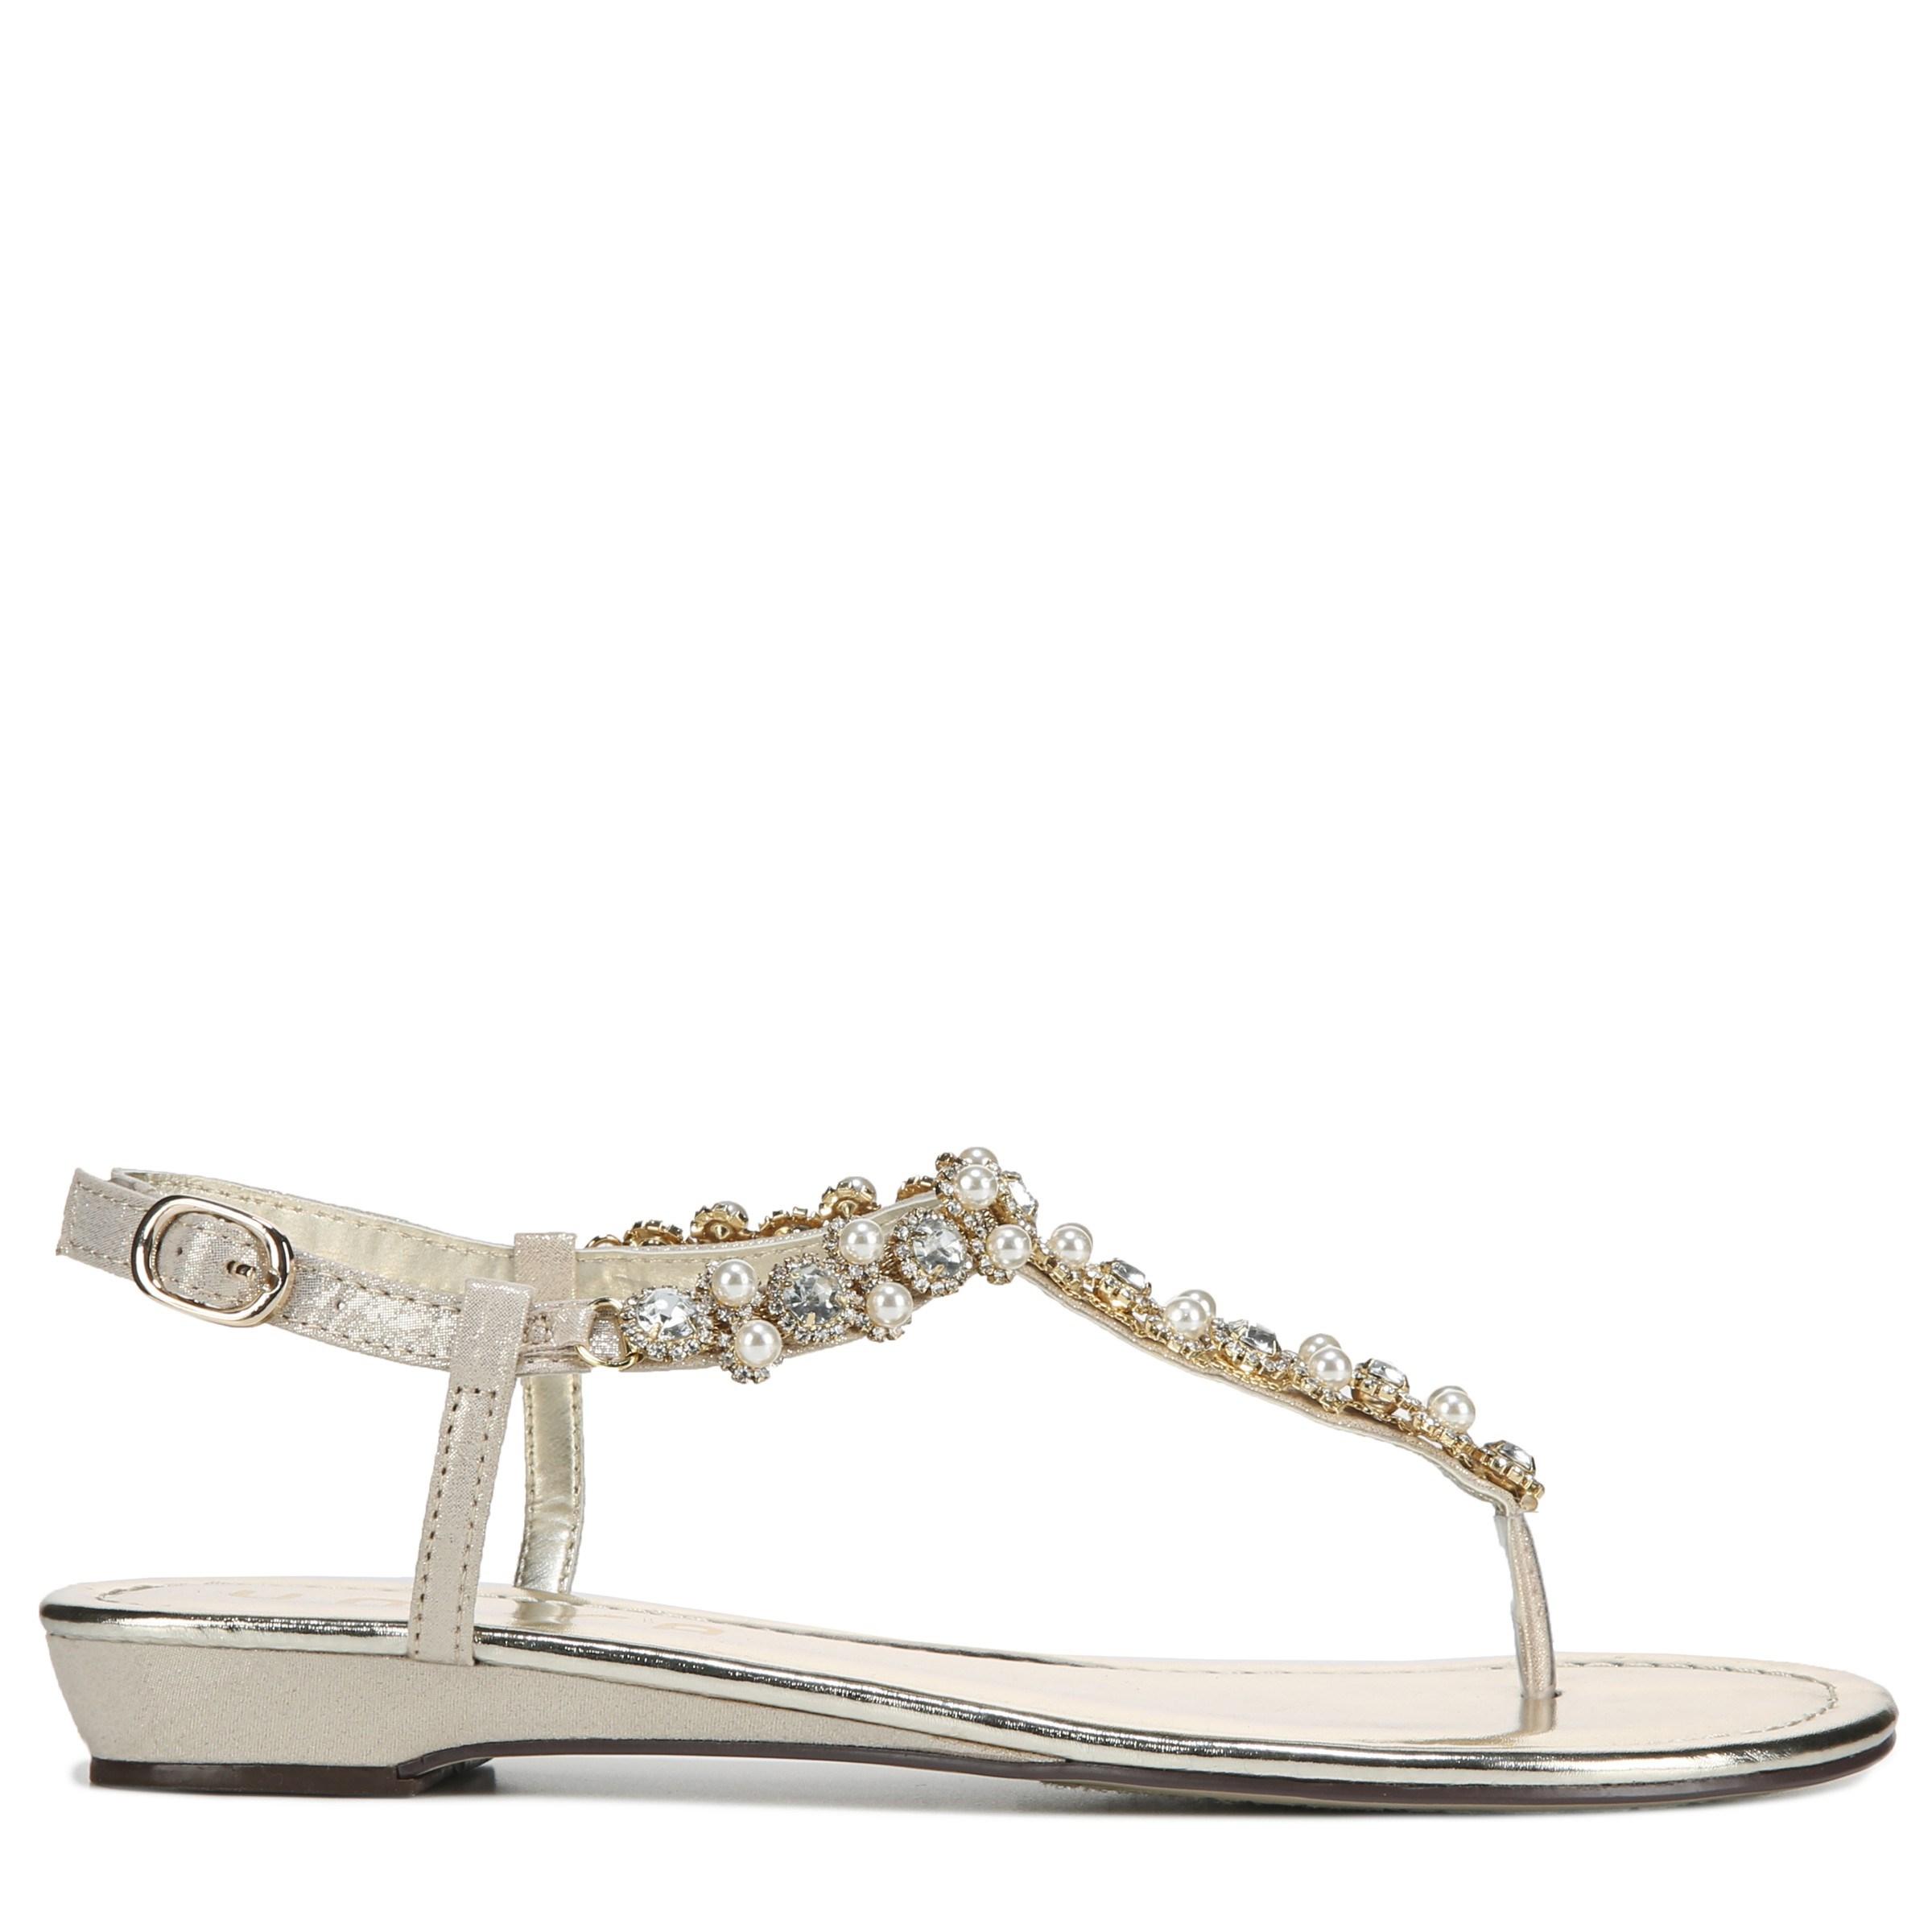 Unisa Liybo Sandals in Gold Pearl 